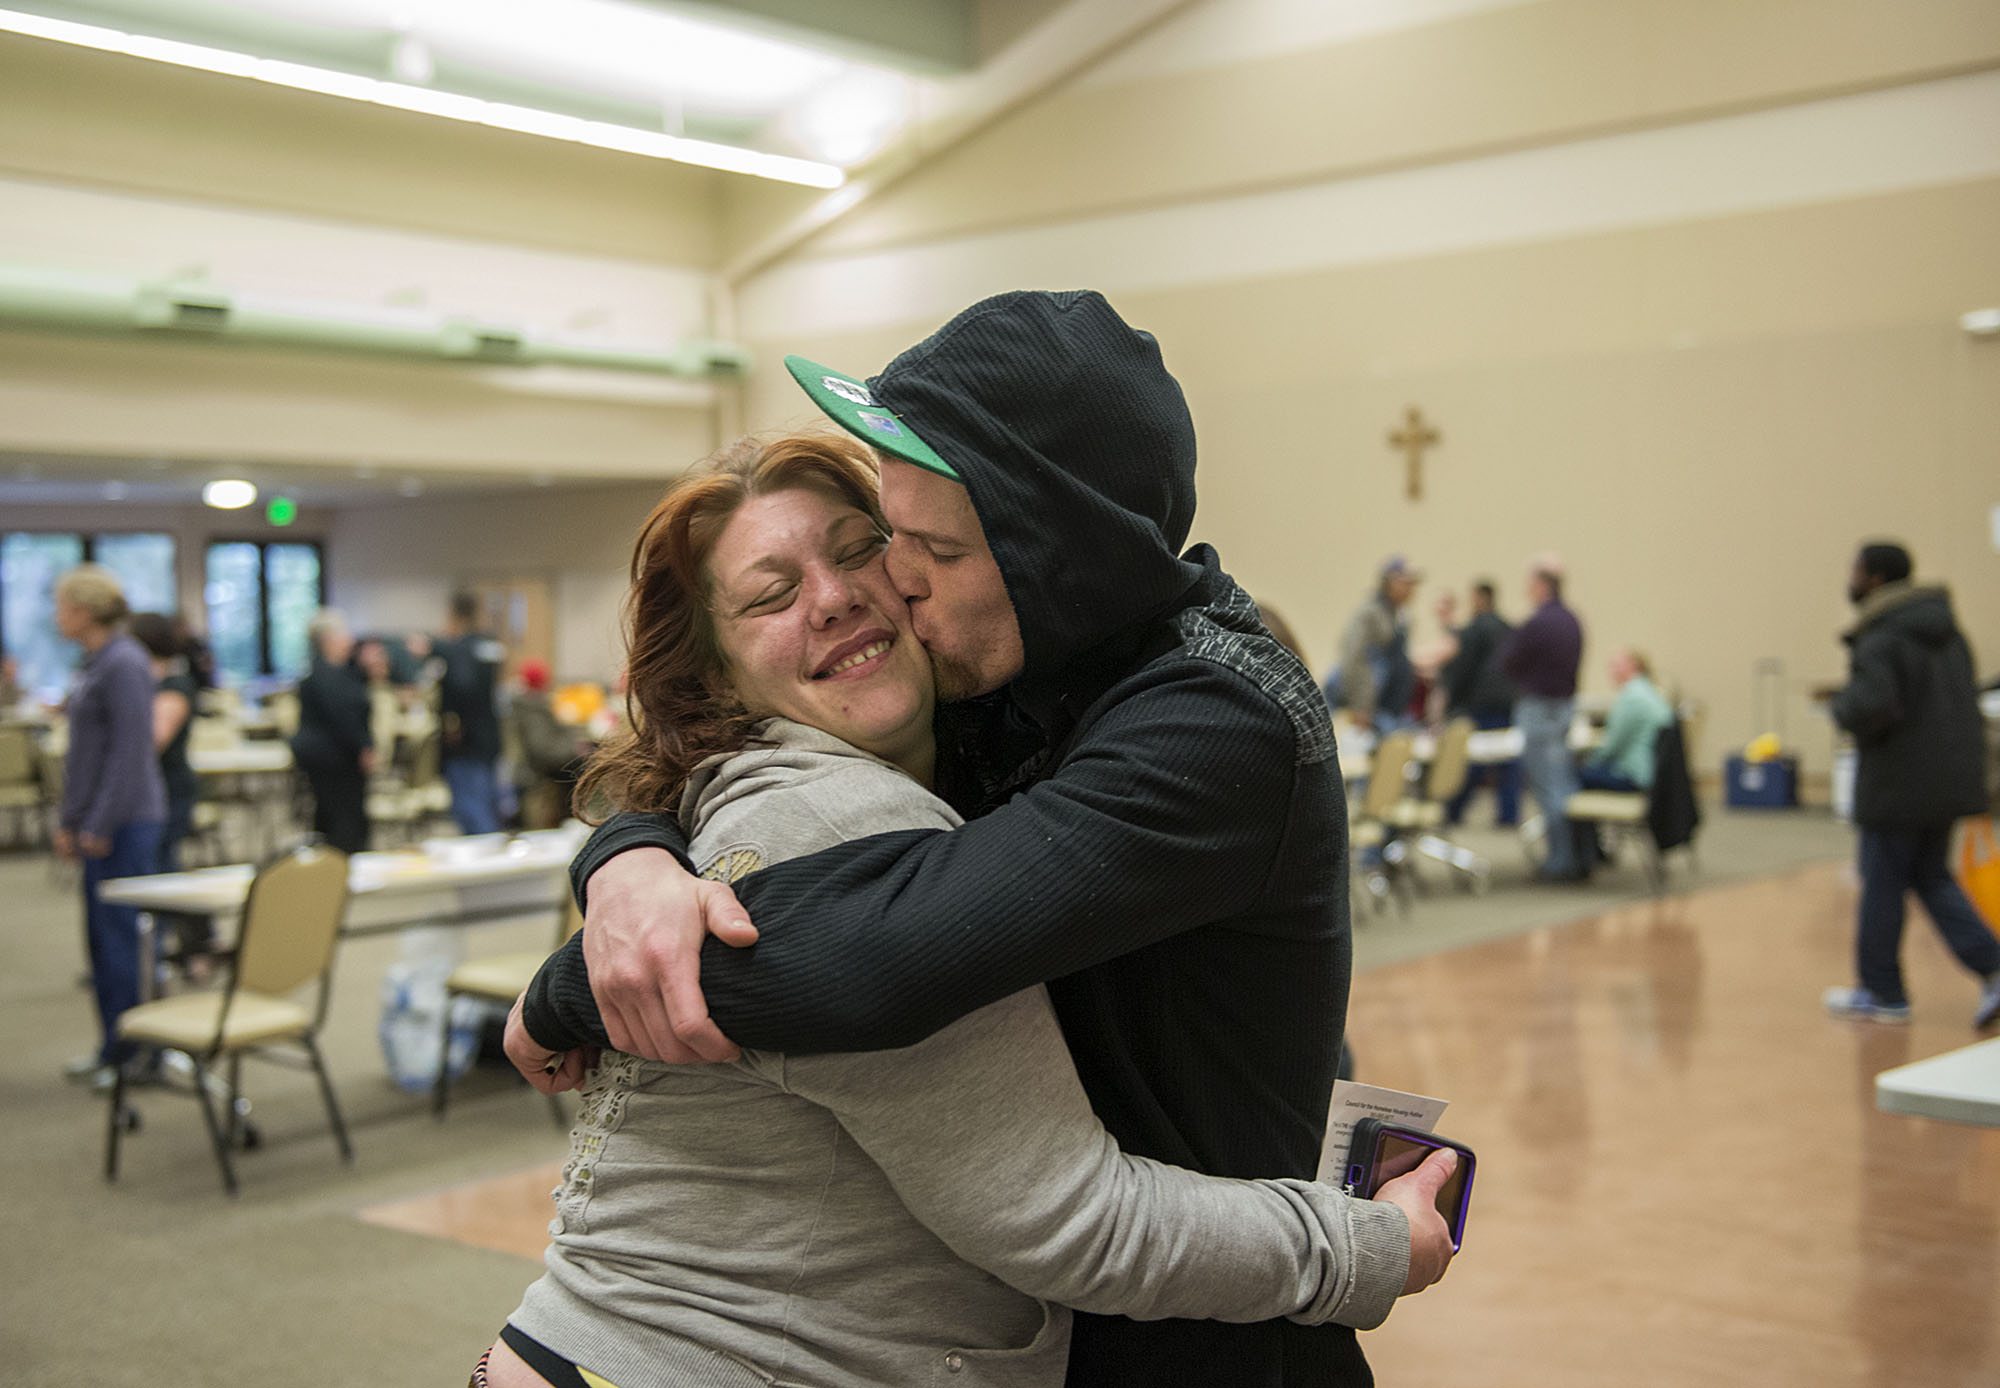 Newlyweds Miranda and J.J. Macomber of Vancouver share a sweet moment as they wait to shop for new clothes during Project Homeless Connect on Thursday morning, Jan. 28, 2016 at St. Joseph Catholic Church.